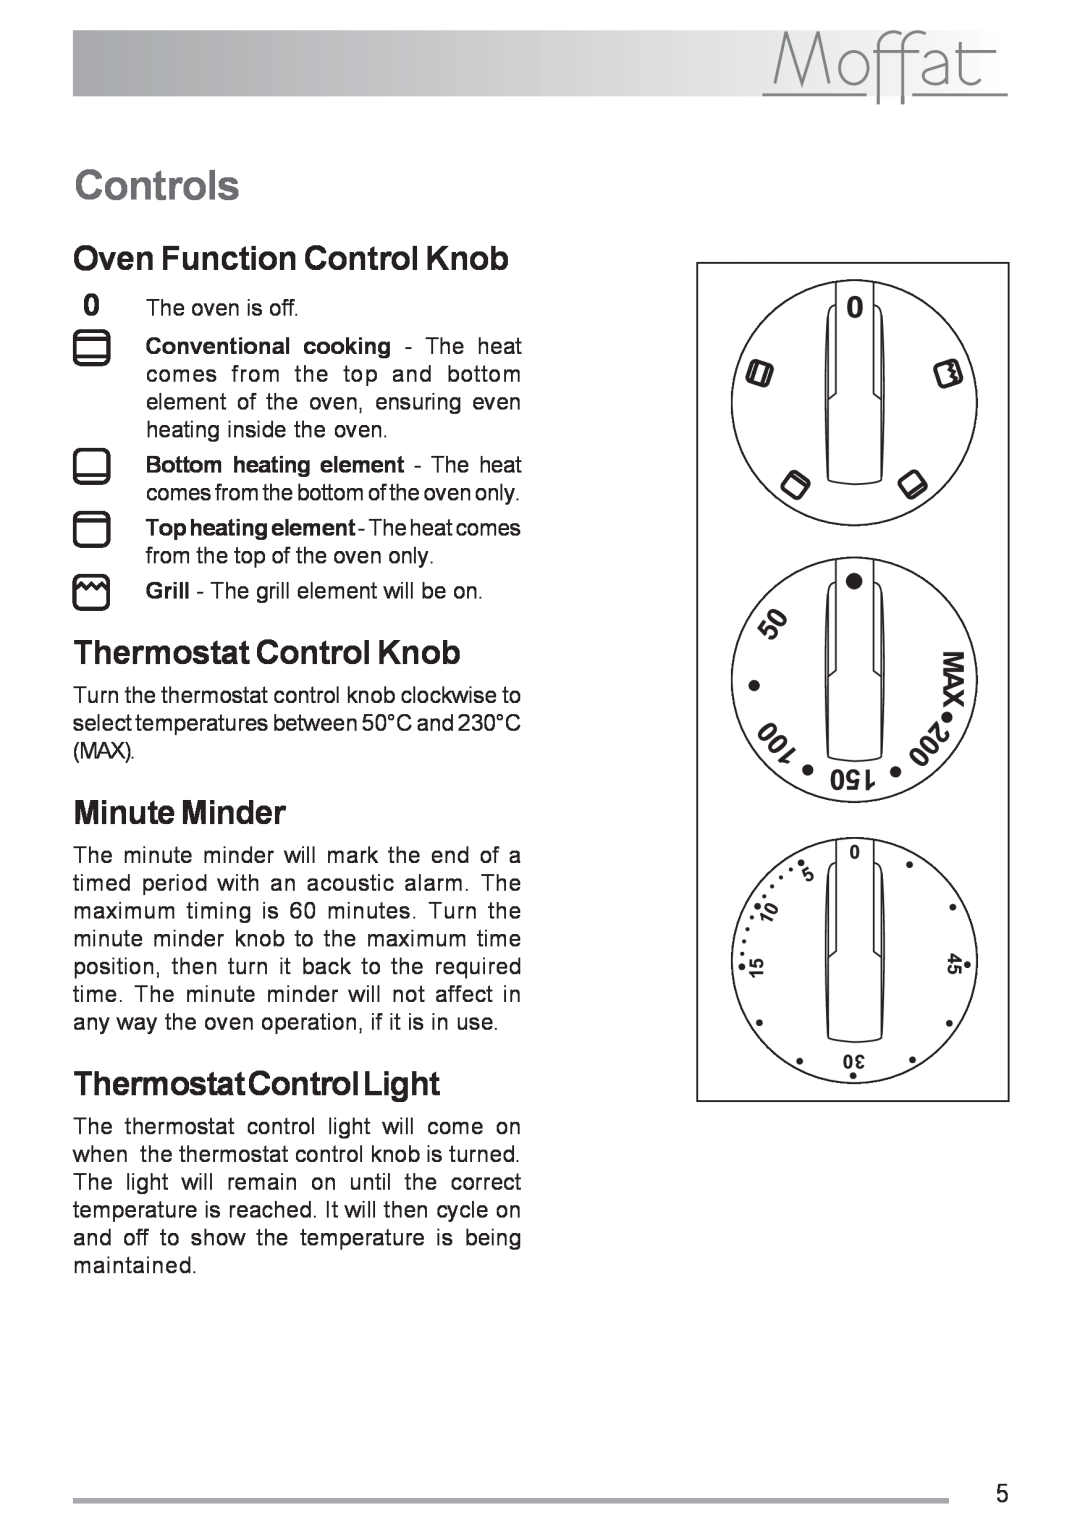 Moffat MSS 601 manual Controls, Oven Function Control Knob, Thermostat Control Knob, Minute Minder, ThermostatControlLight 